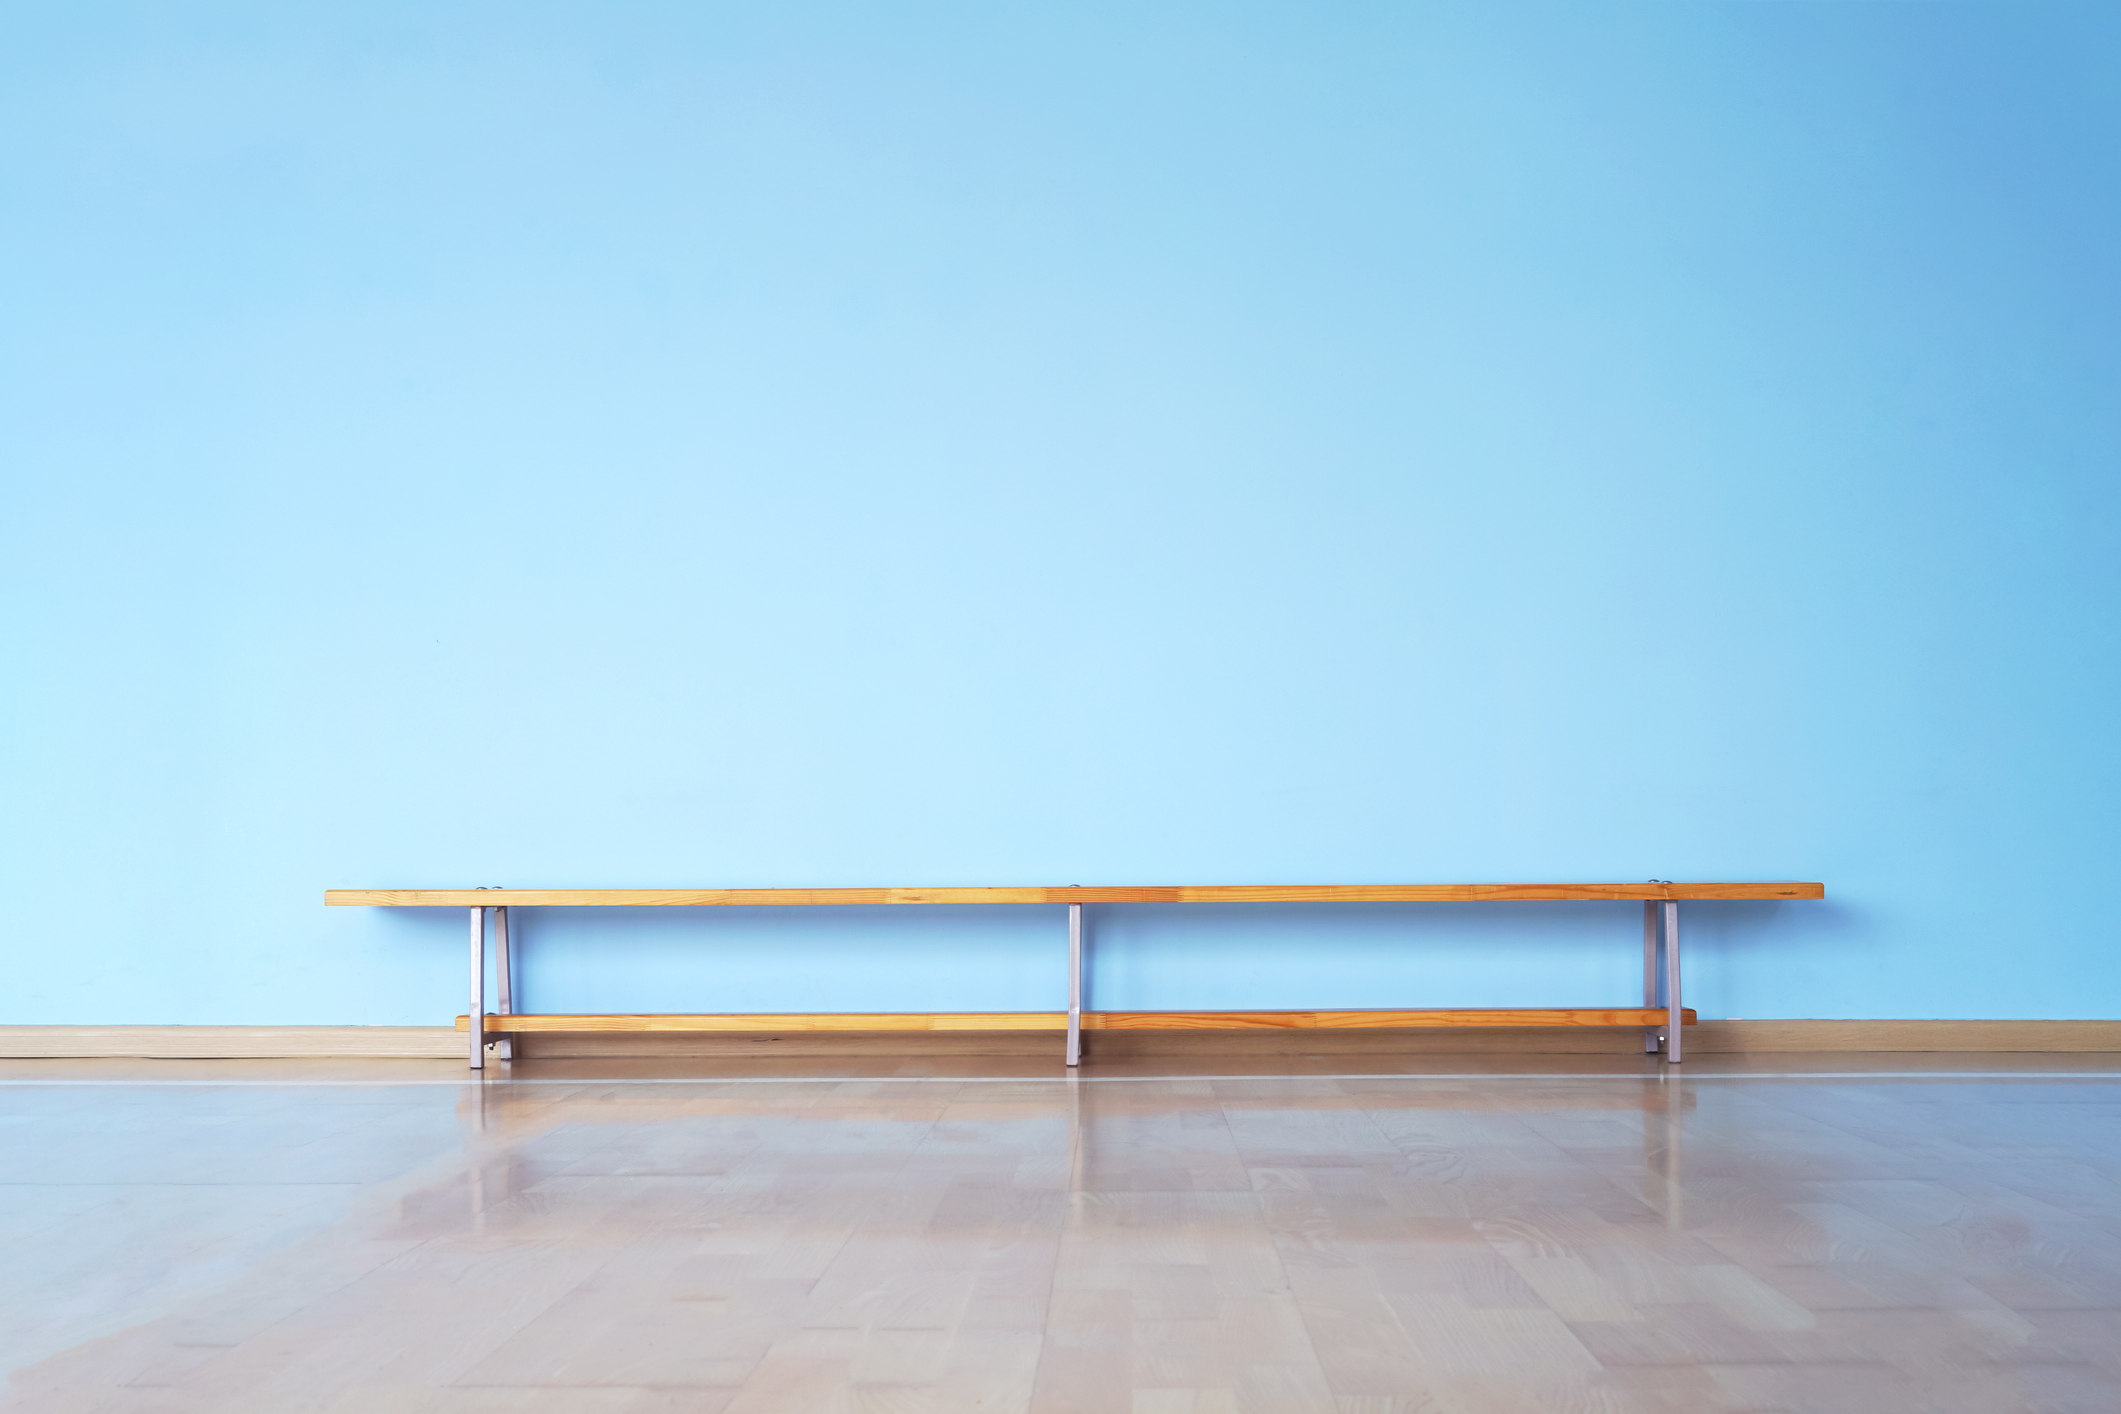 blog header image of an empty bench